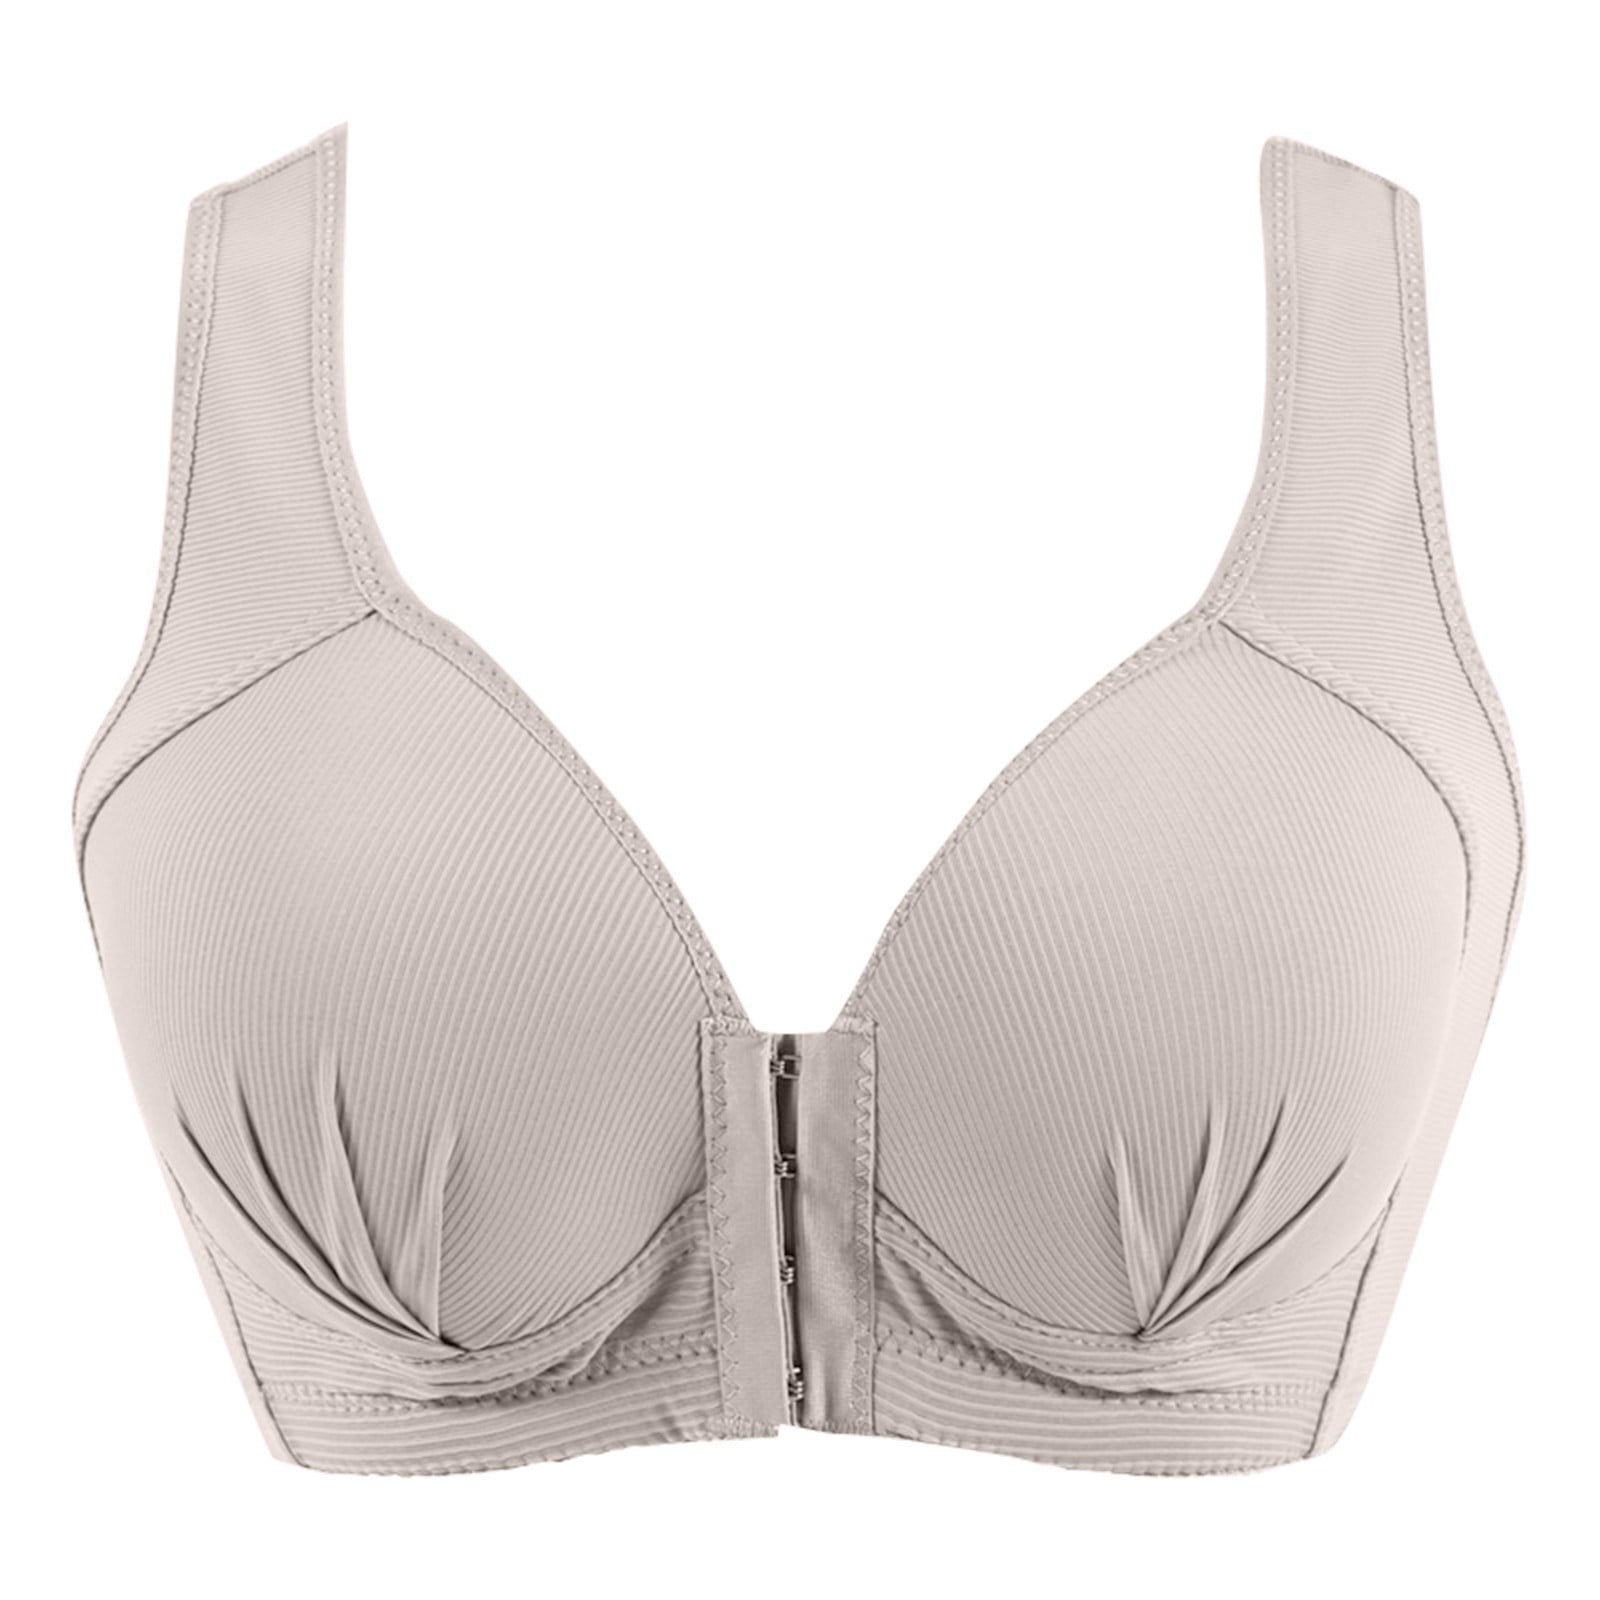 Knosfe Padded Bras for Women Front Closure Lingerie Full Coverage Push Up  T-Shirt Bra Gray 42 